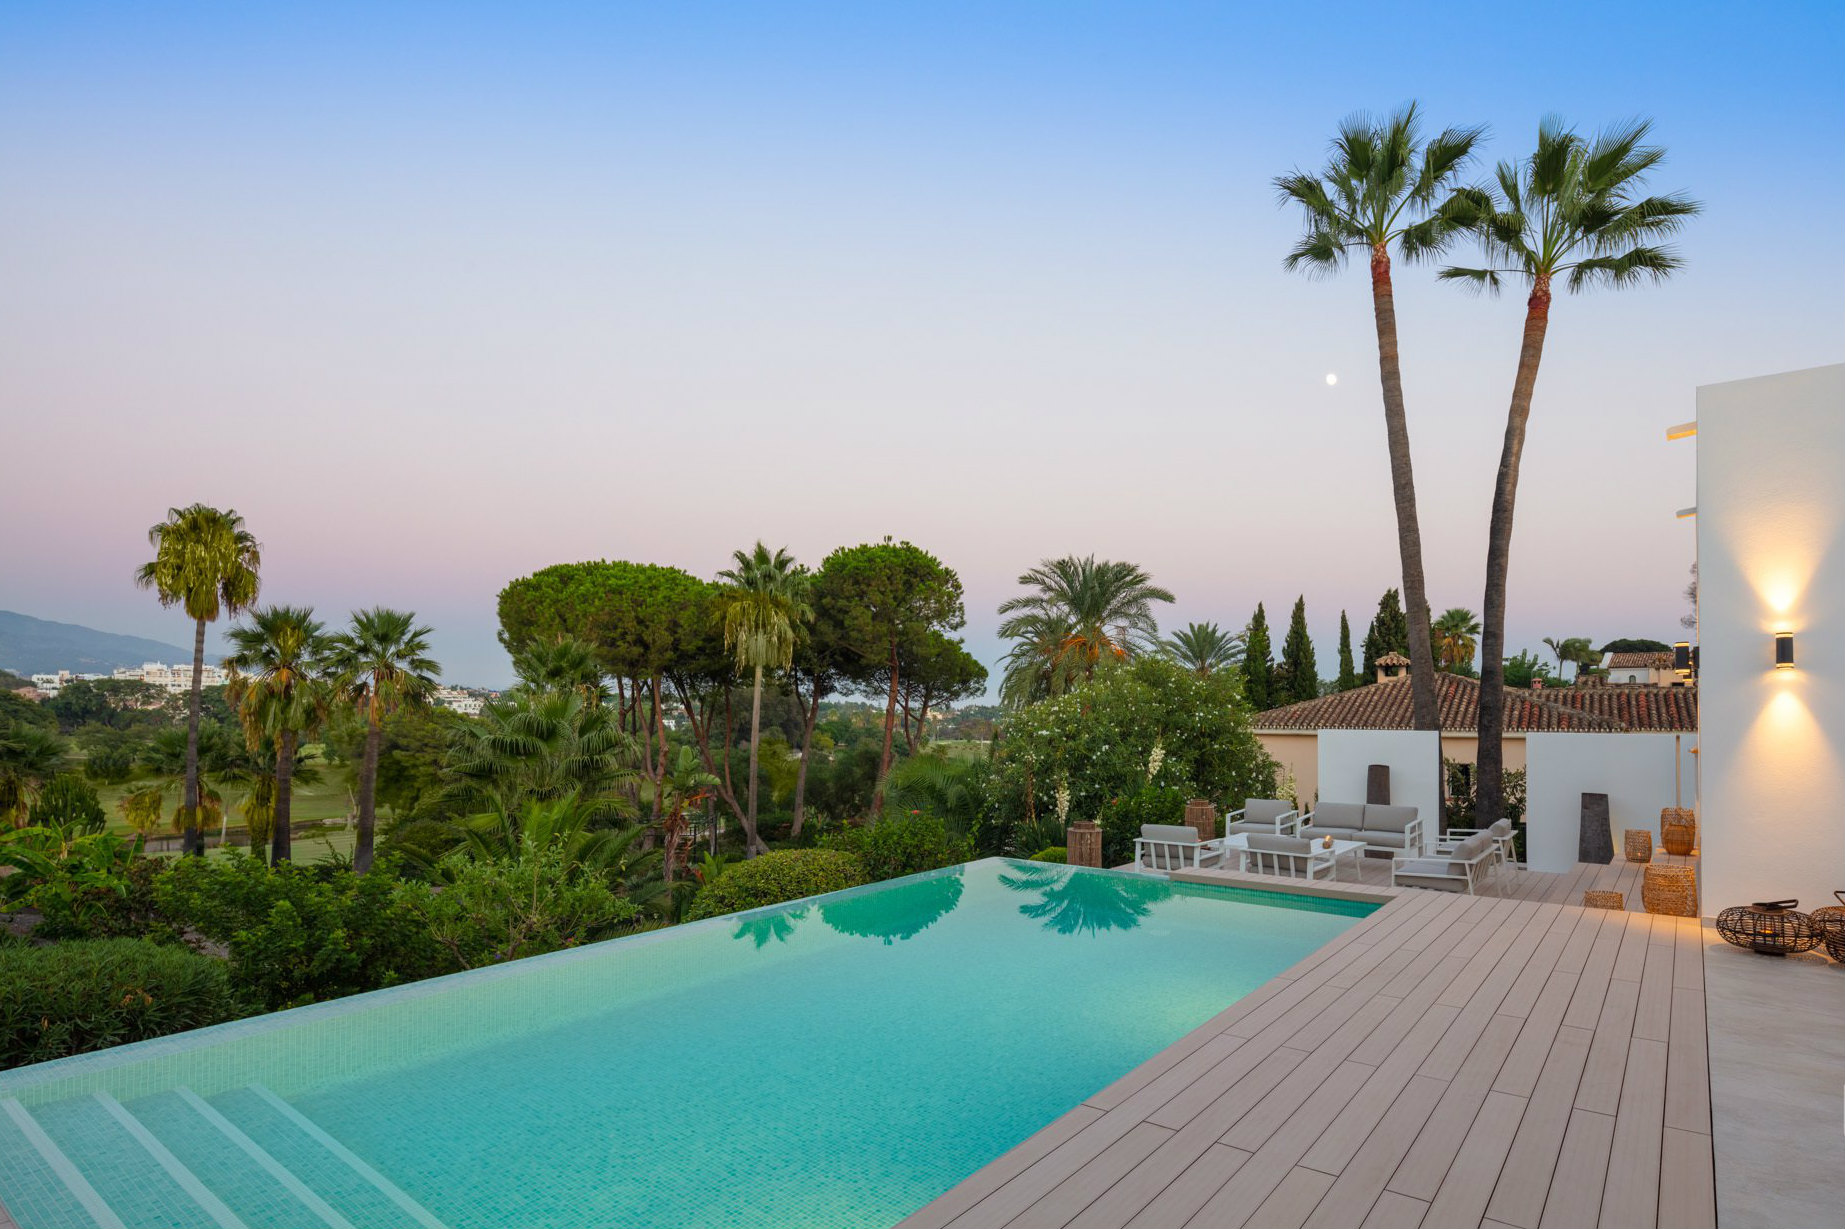 Revisiting Marbella: Top 12 luxury villas - and taxes tips